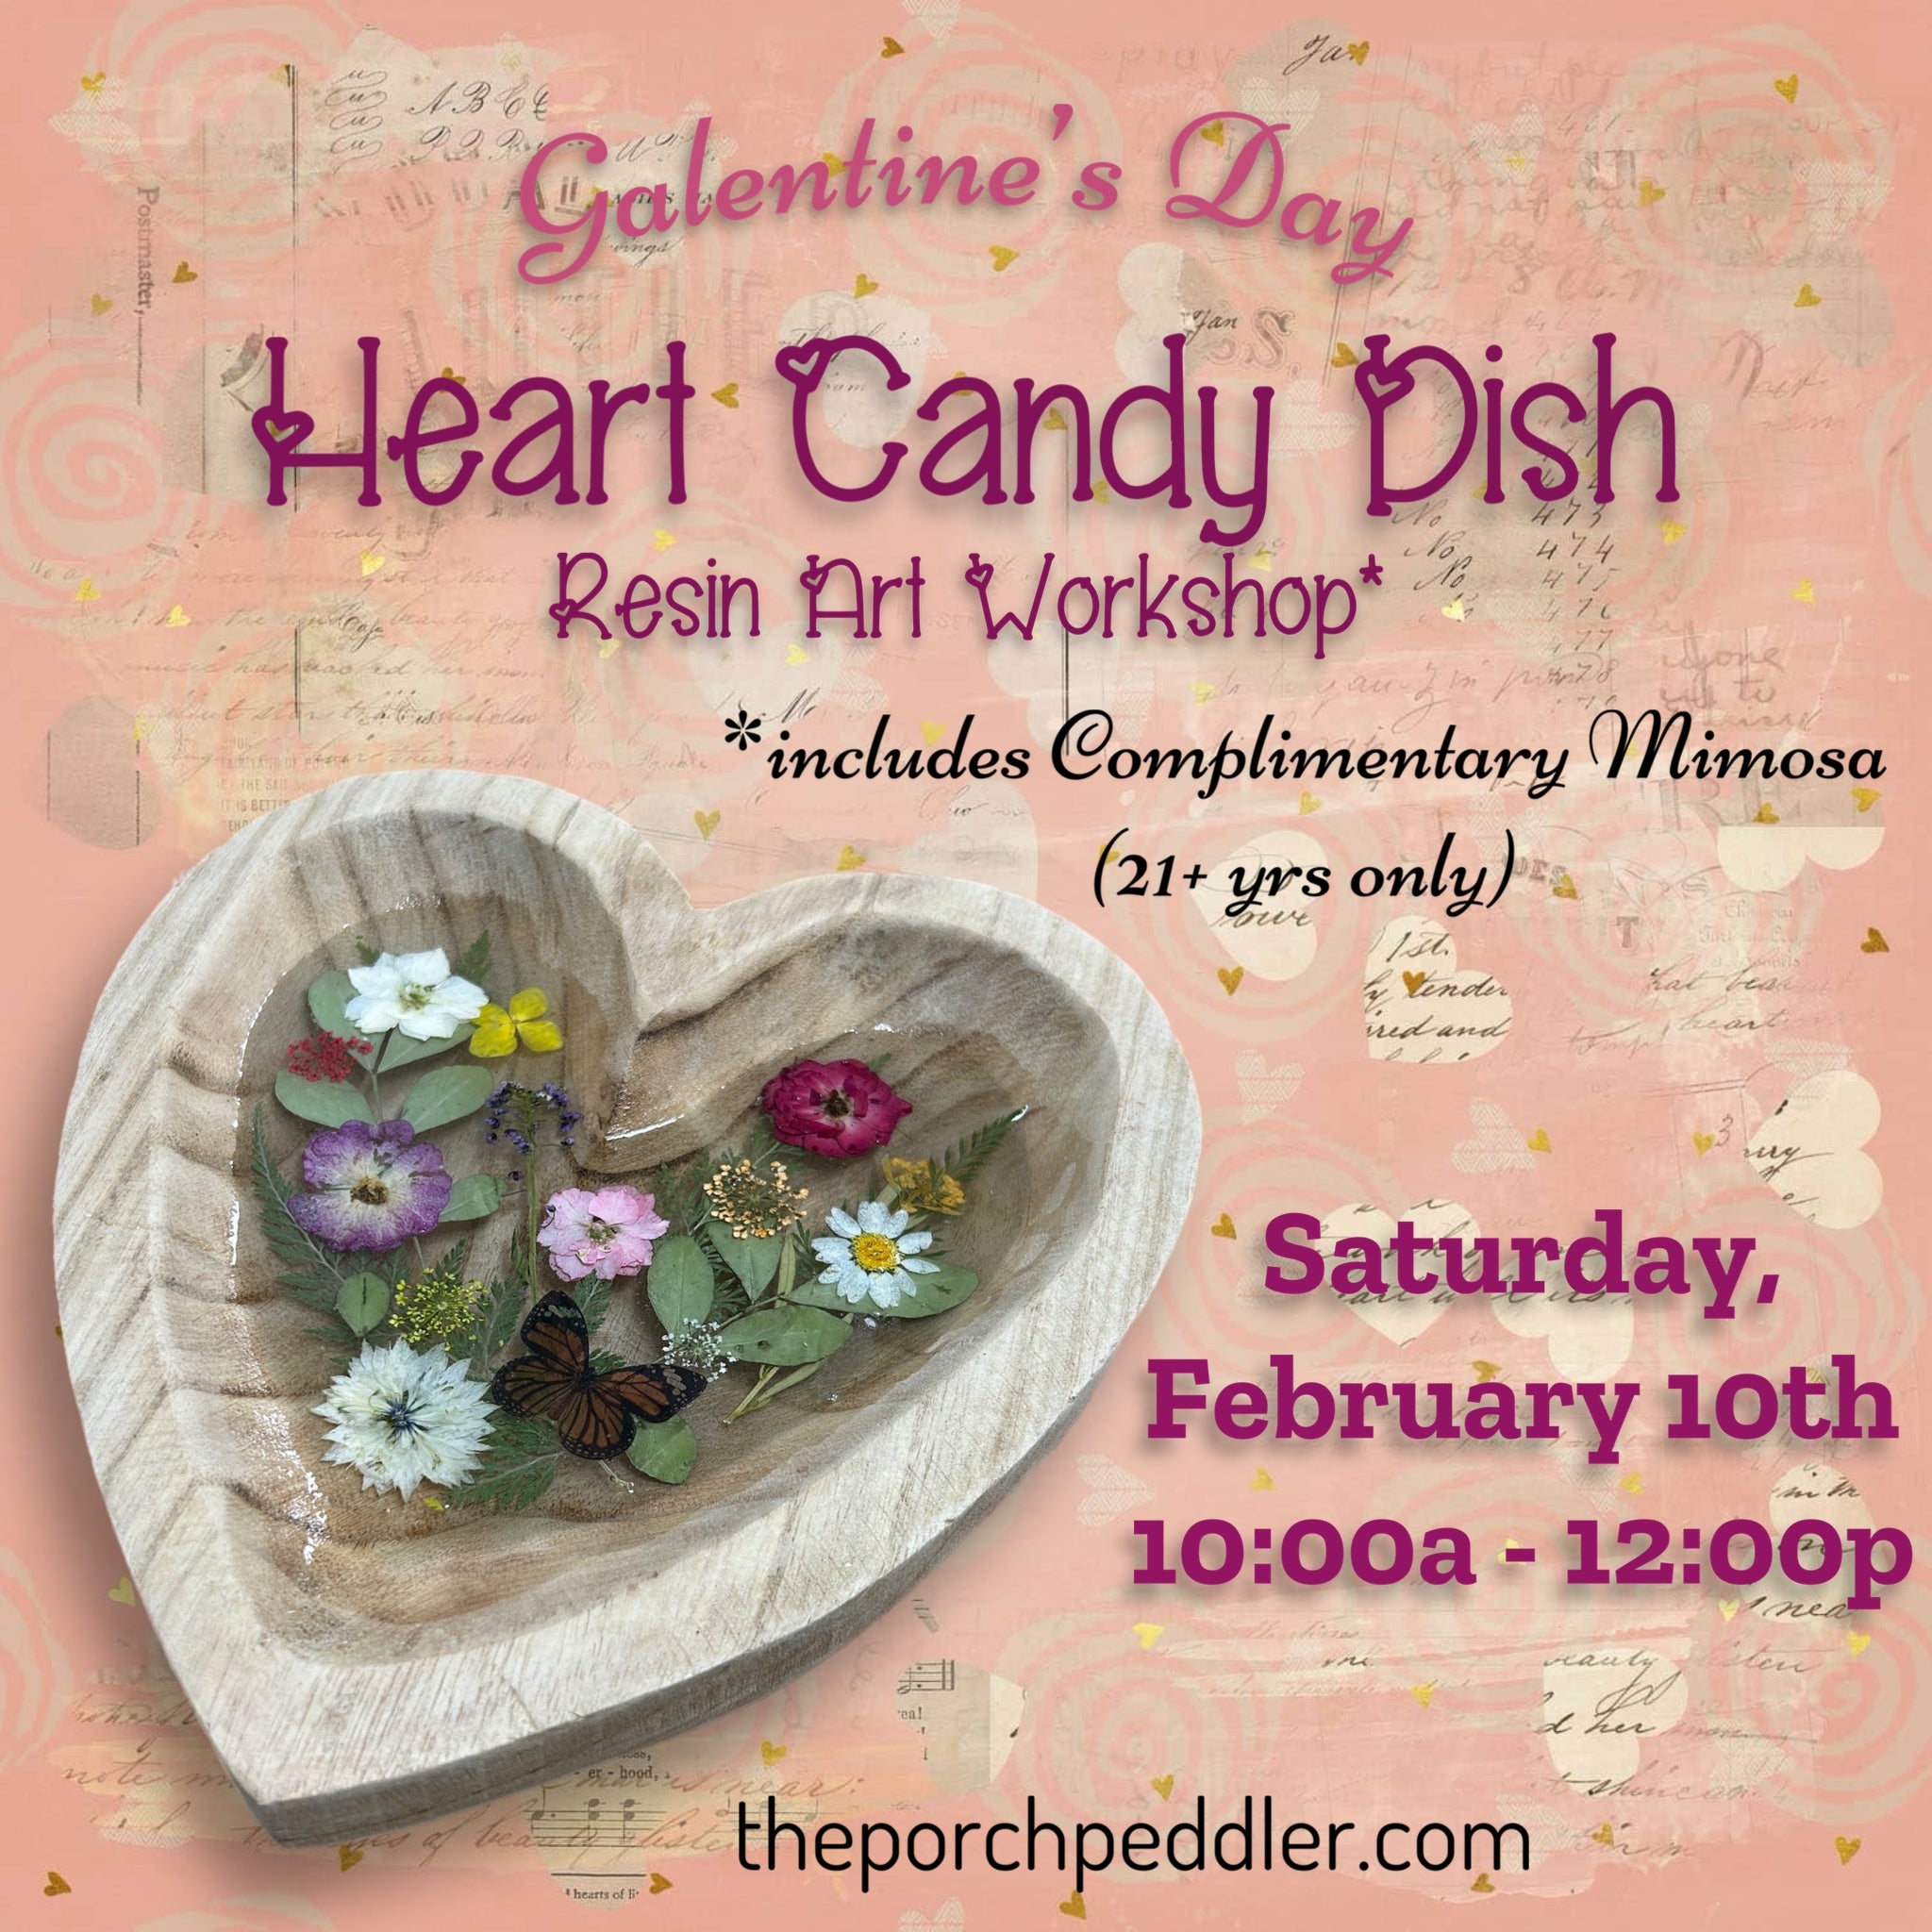 February 10th - Galentine’s Resin Heart Dish Workshop (10a-12p)